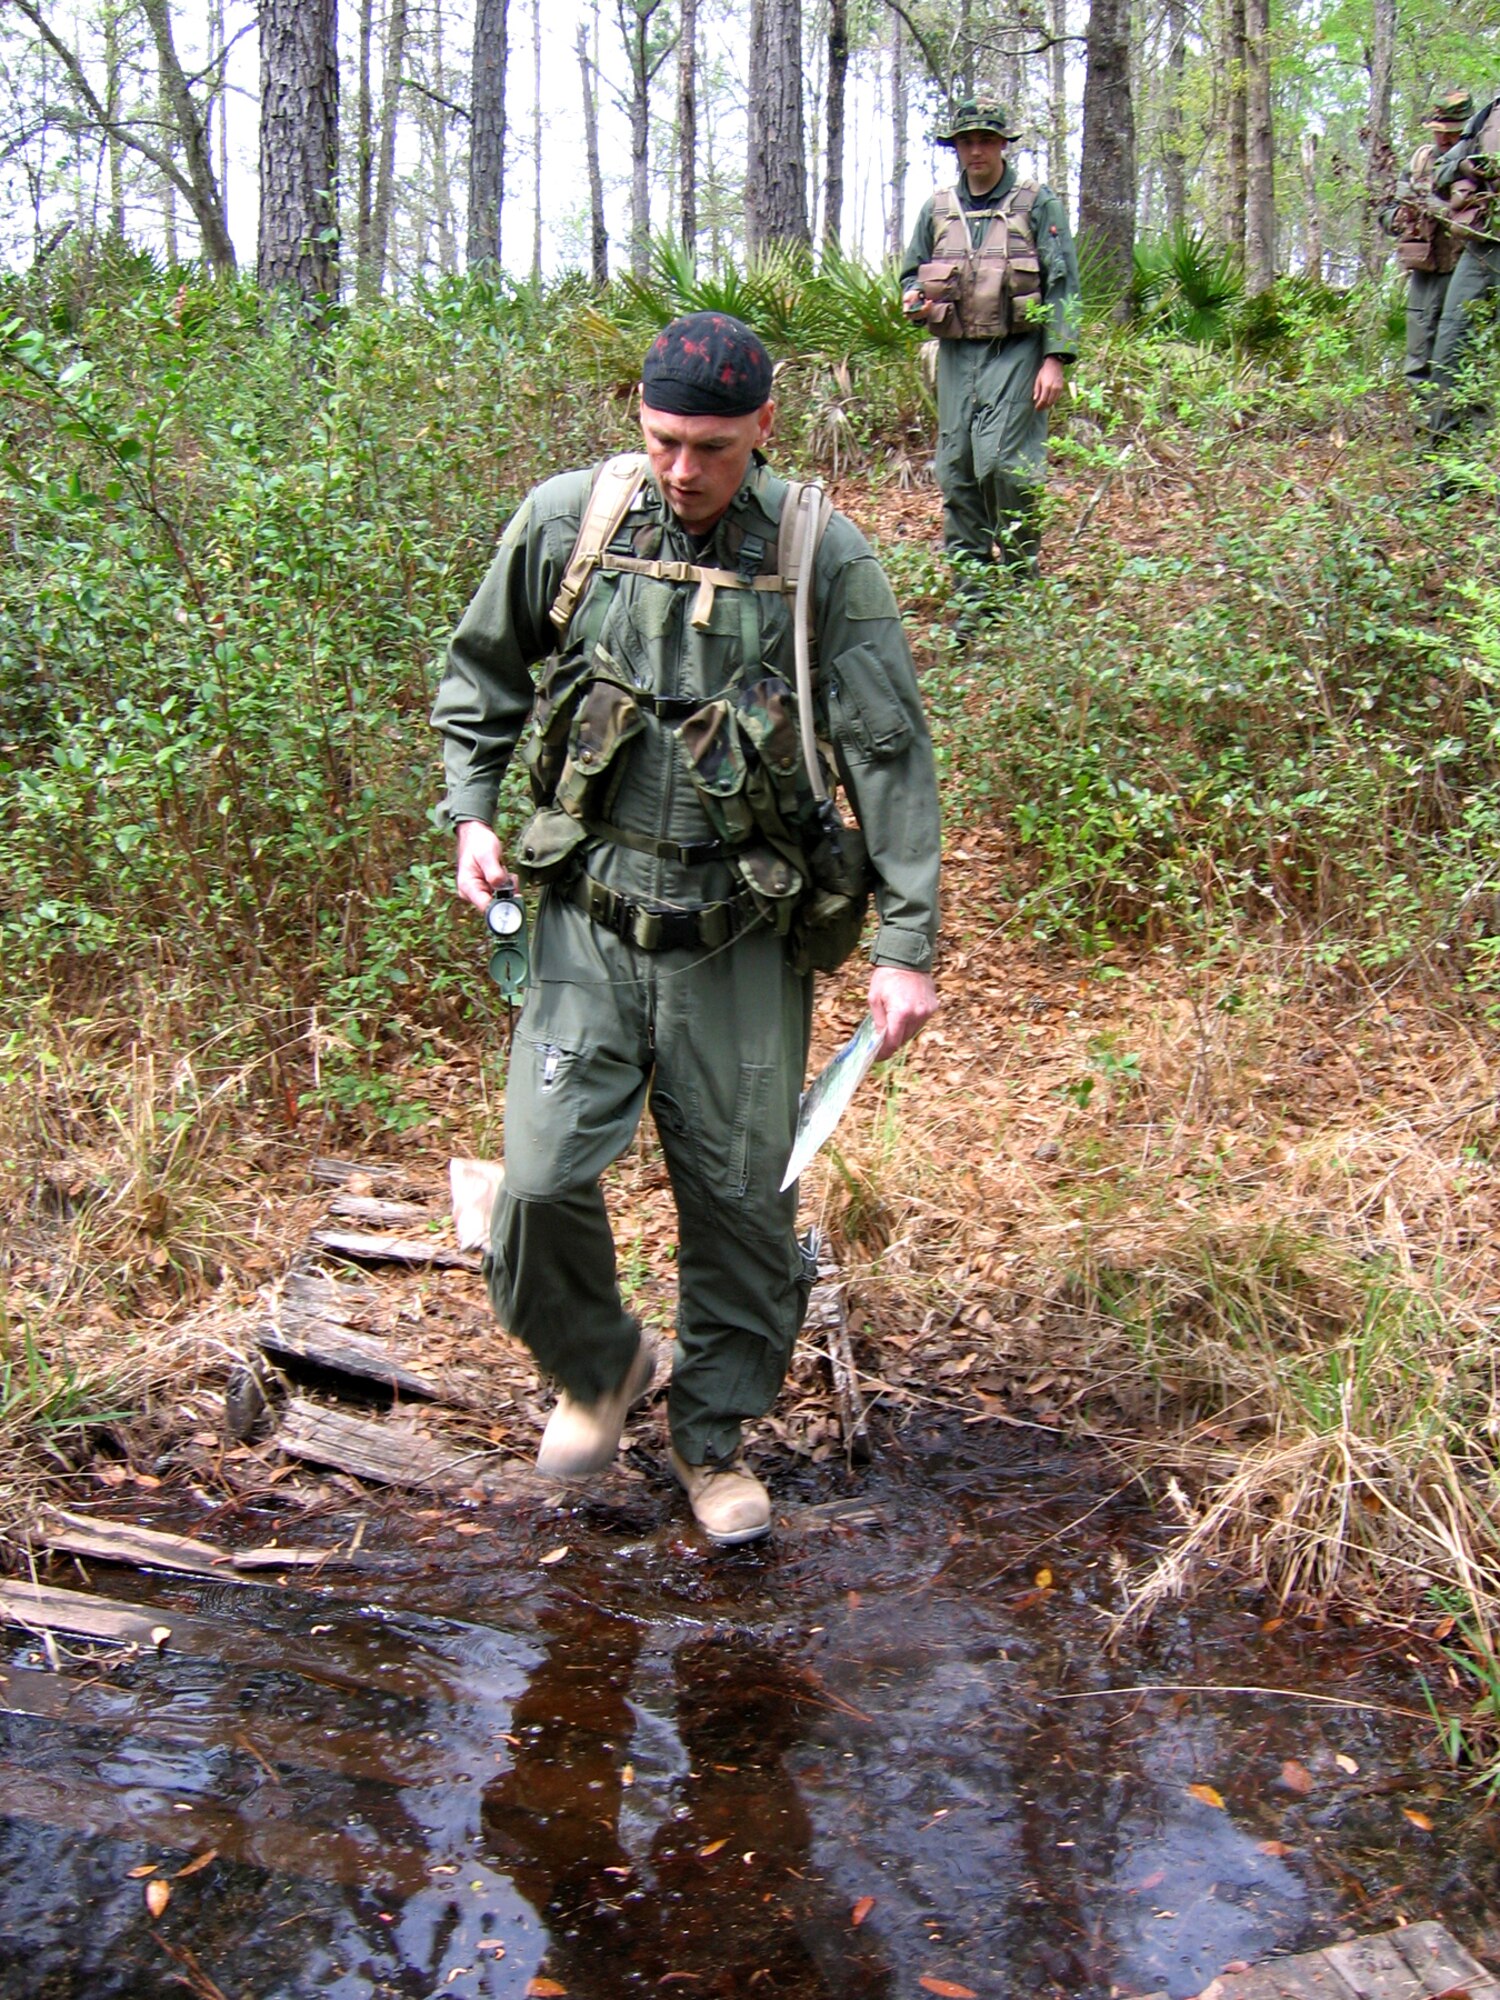 MOODY AIR FORCE BASE, Ga. - Master Sgt. John Buckler, 41st Rescue Squadron, and Capt. Joseph Booth, 347th Operations Support Squadron, cross a stream during combat survival training March 14 at Grand Bay Wildlife Management Area here. Six Moody aircrew members completed the refresher training, which teaches survival skills in combat and peacetime situations. (Photo by Airman Eric Schloeffel)